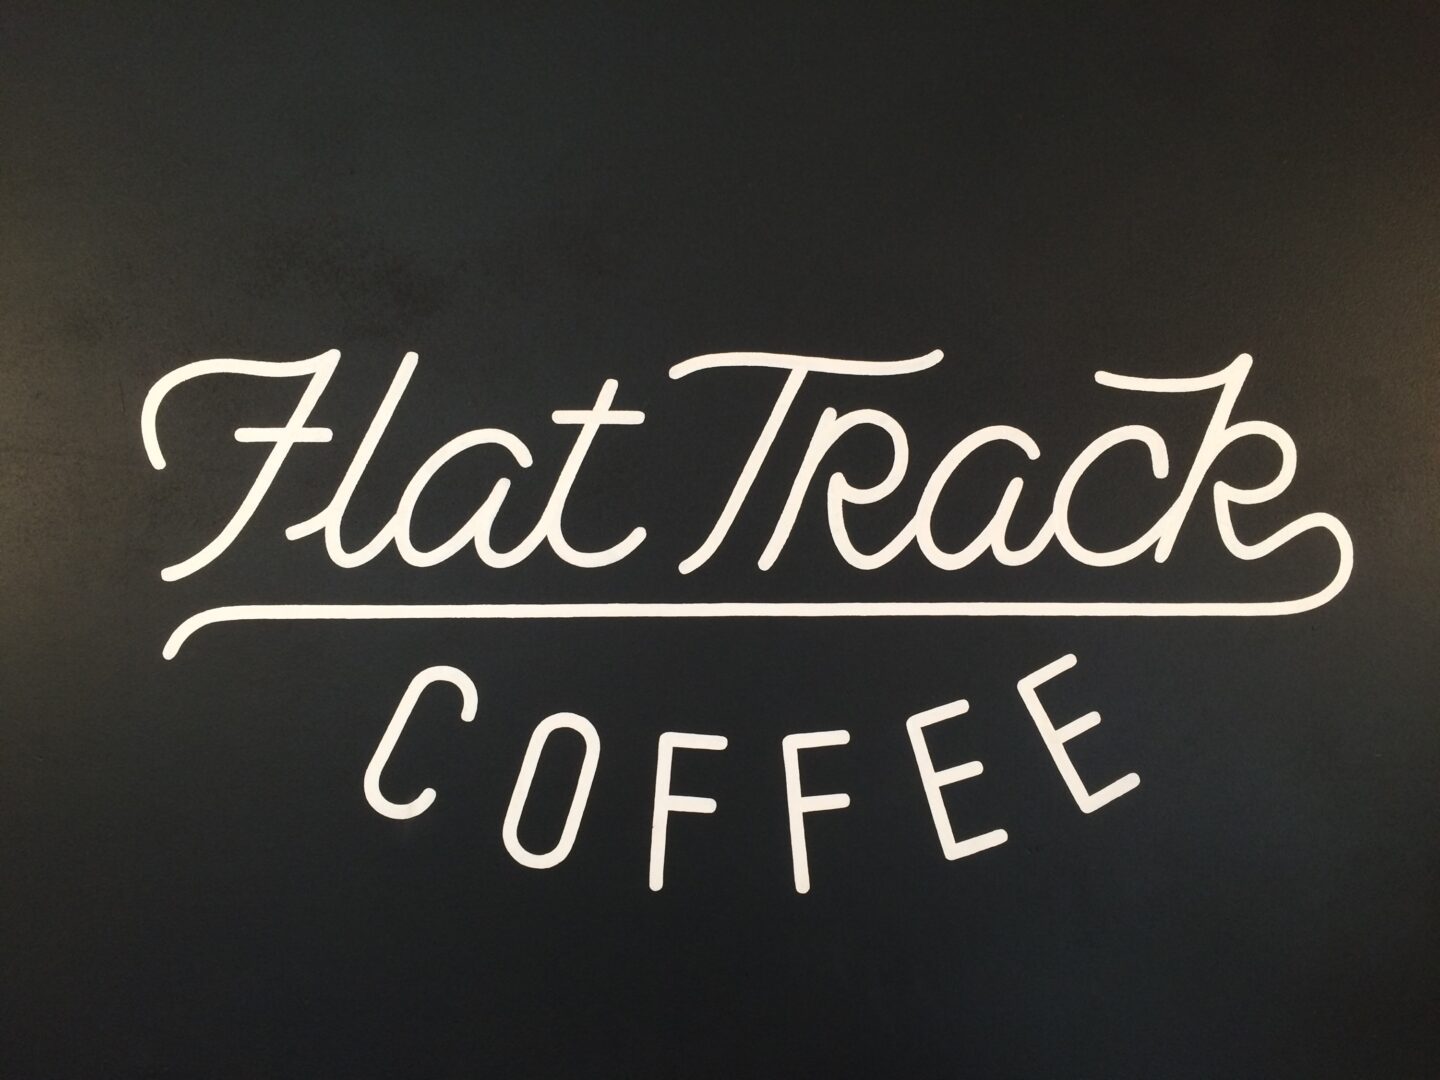 The logo for flat track coffee on a black wall.